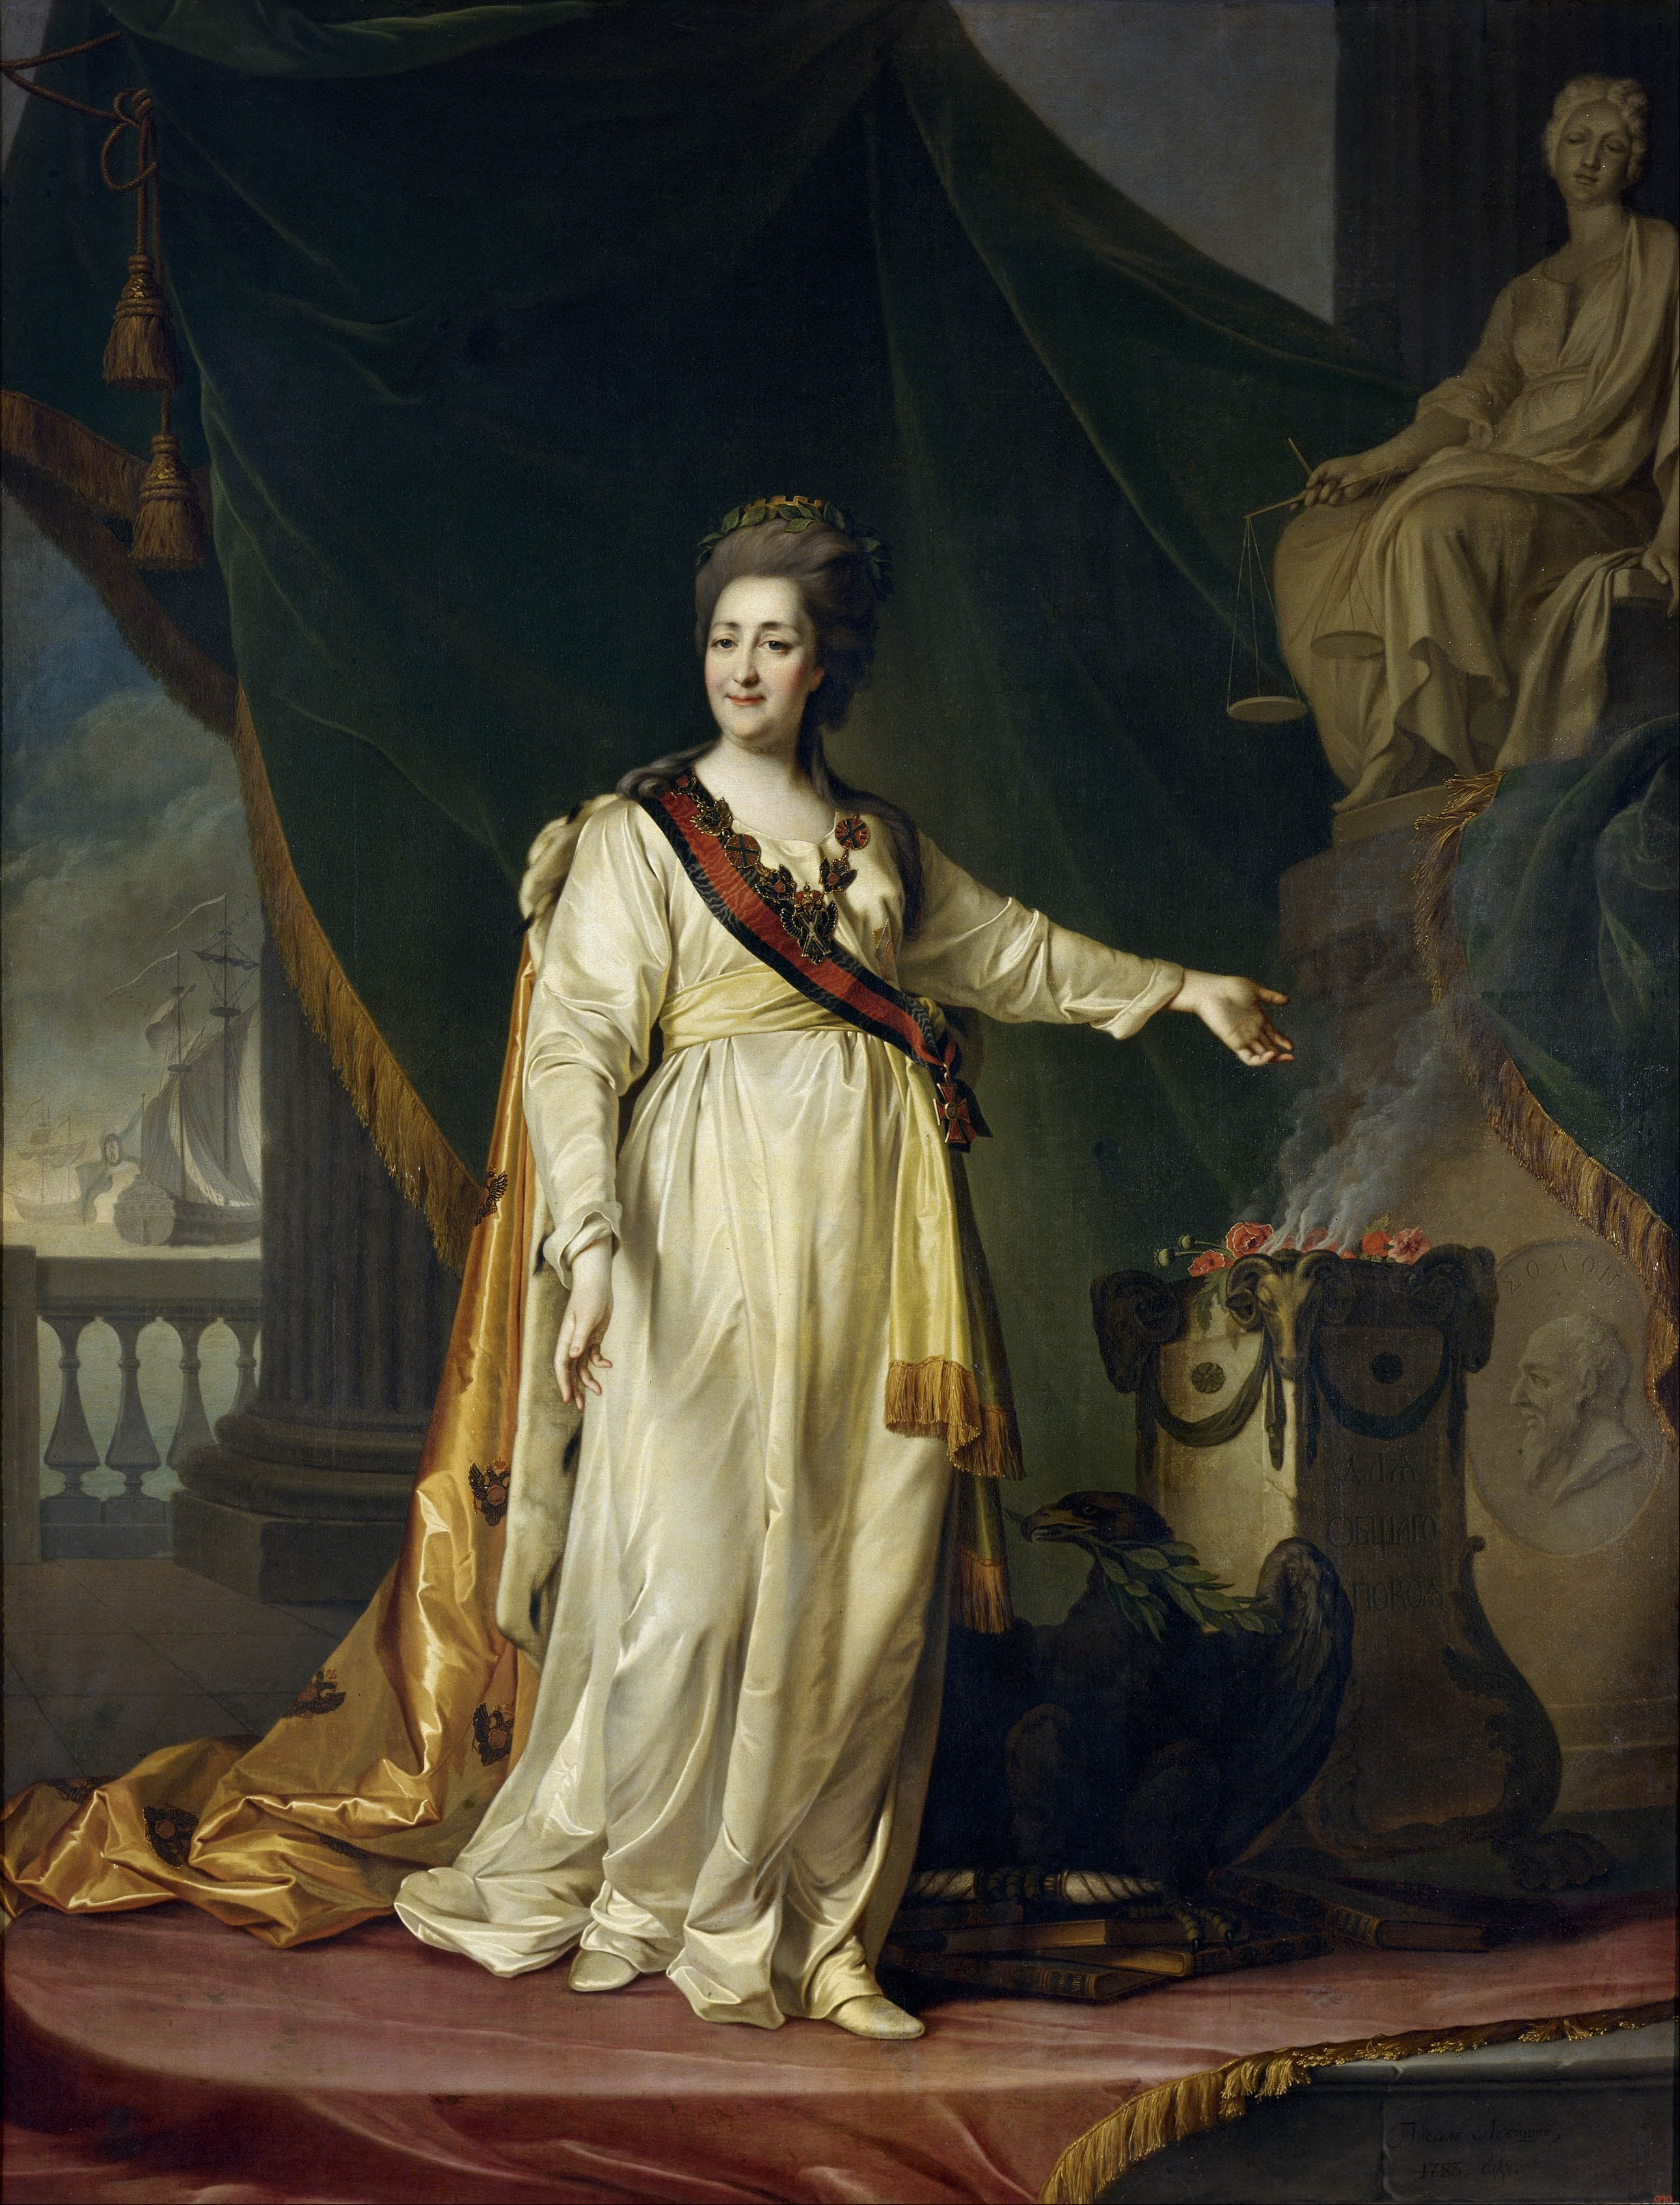 Dmitry Levitsky - Portrait of Catherine II the Legislatress in the Temple of the Goddess of Justice - Google Art Project